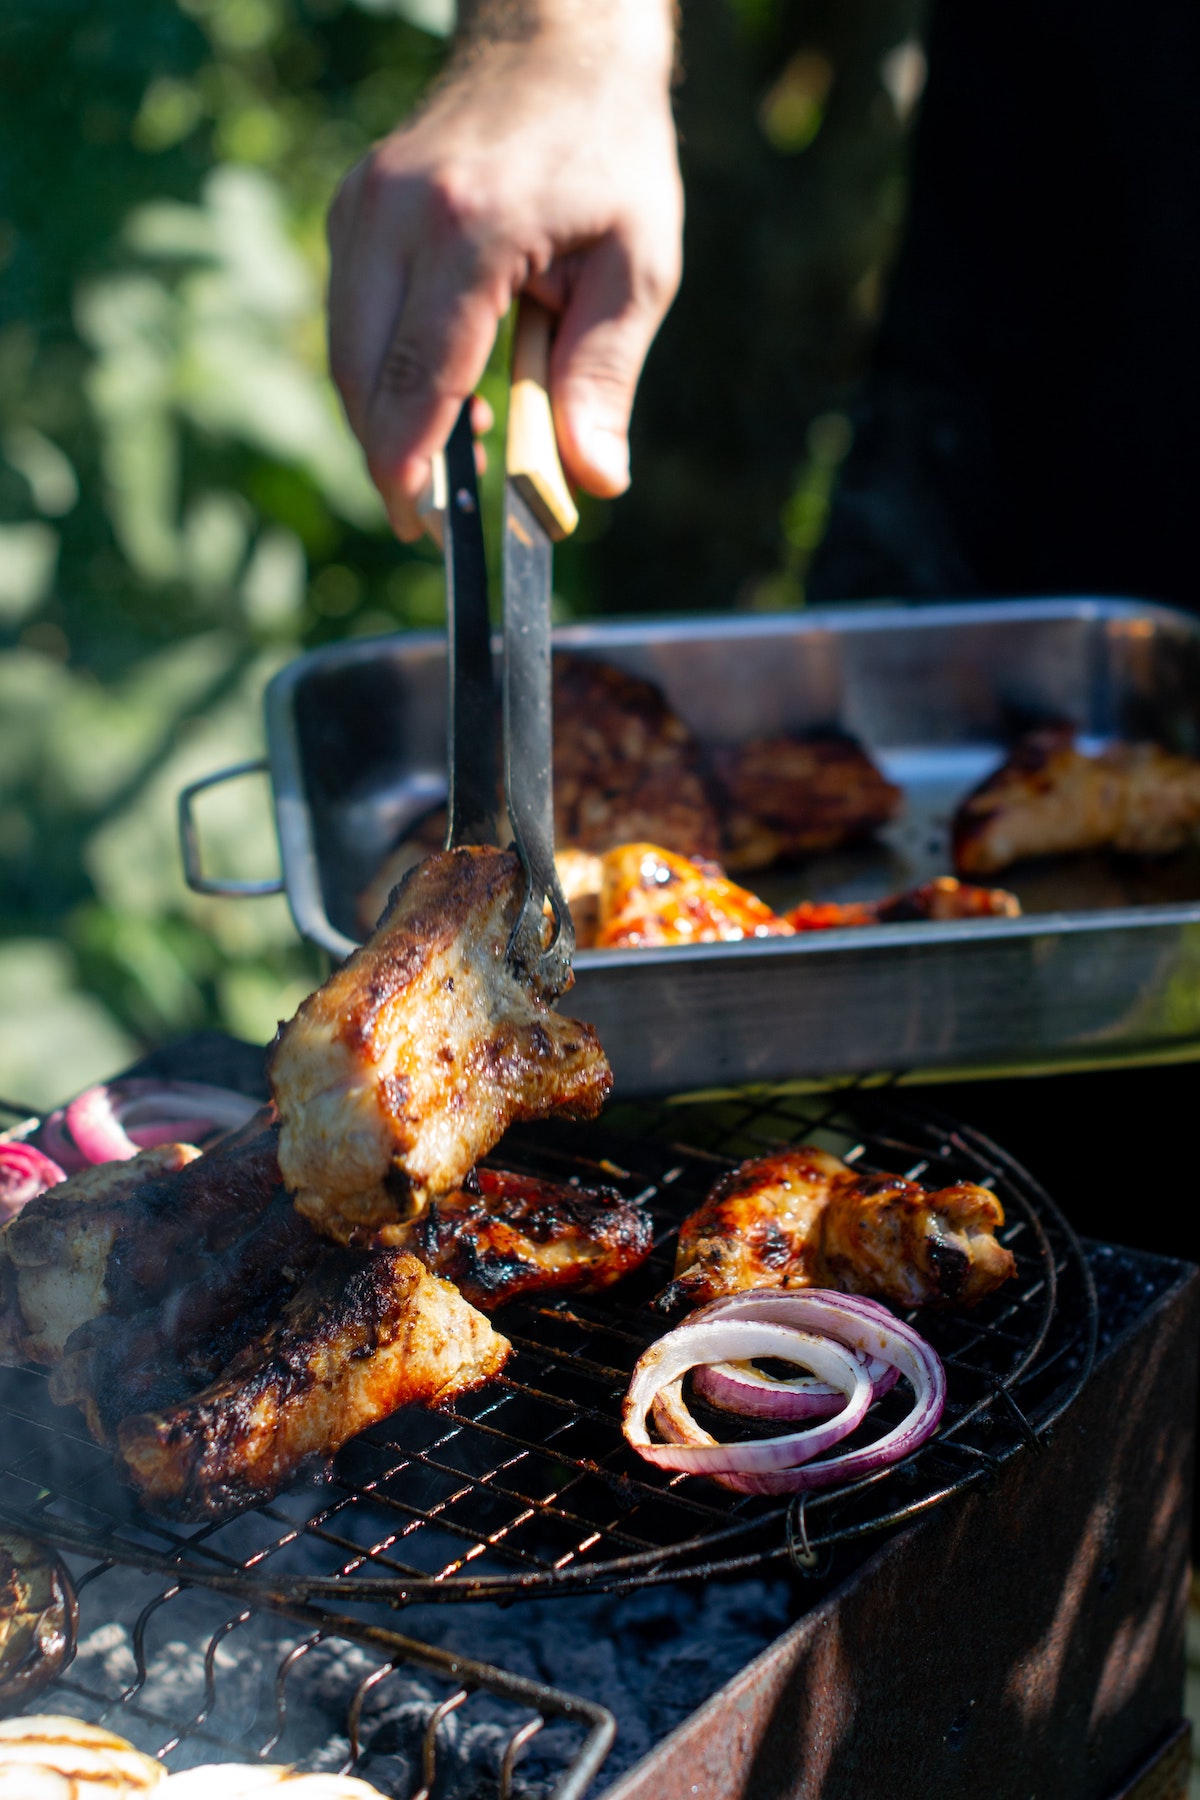 Lazy Susan's how to clean your BBQ tips